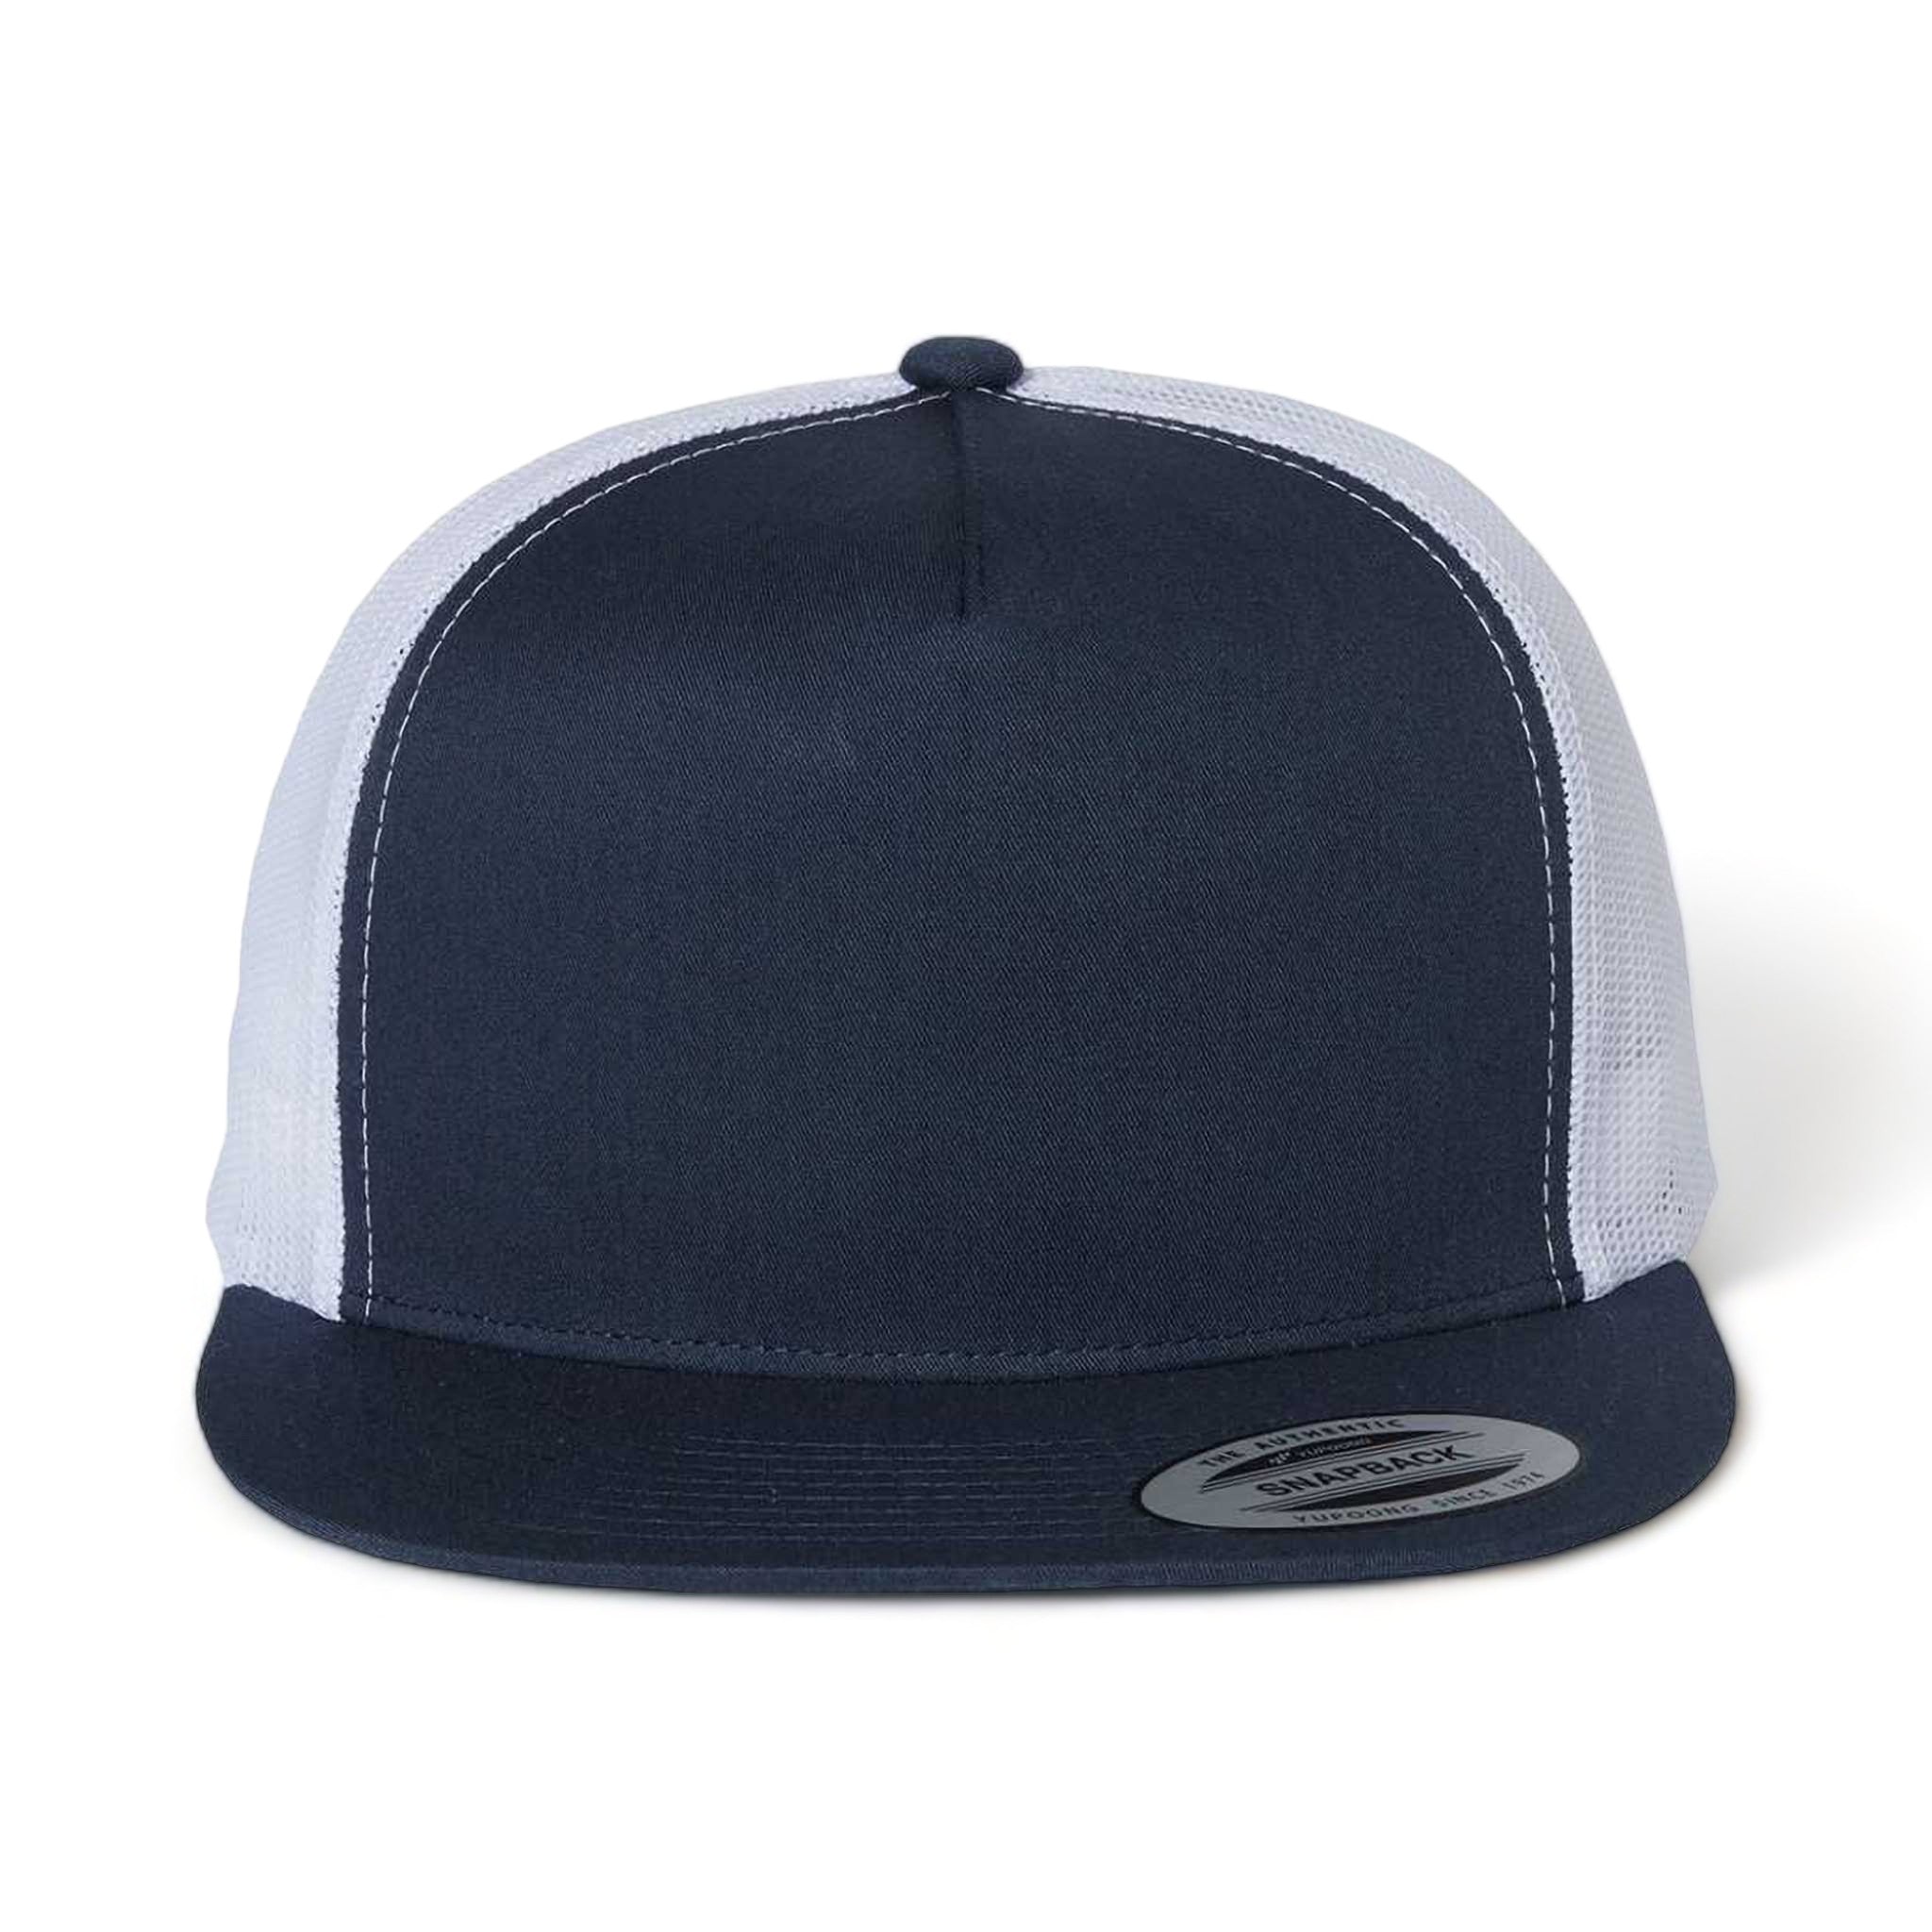 Front view of YP Classics 6006 custom hat in navy and white